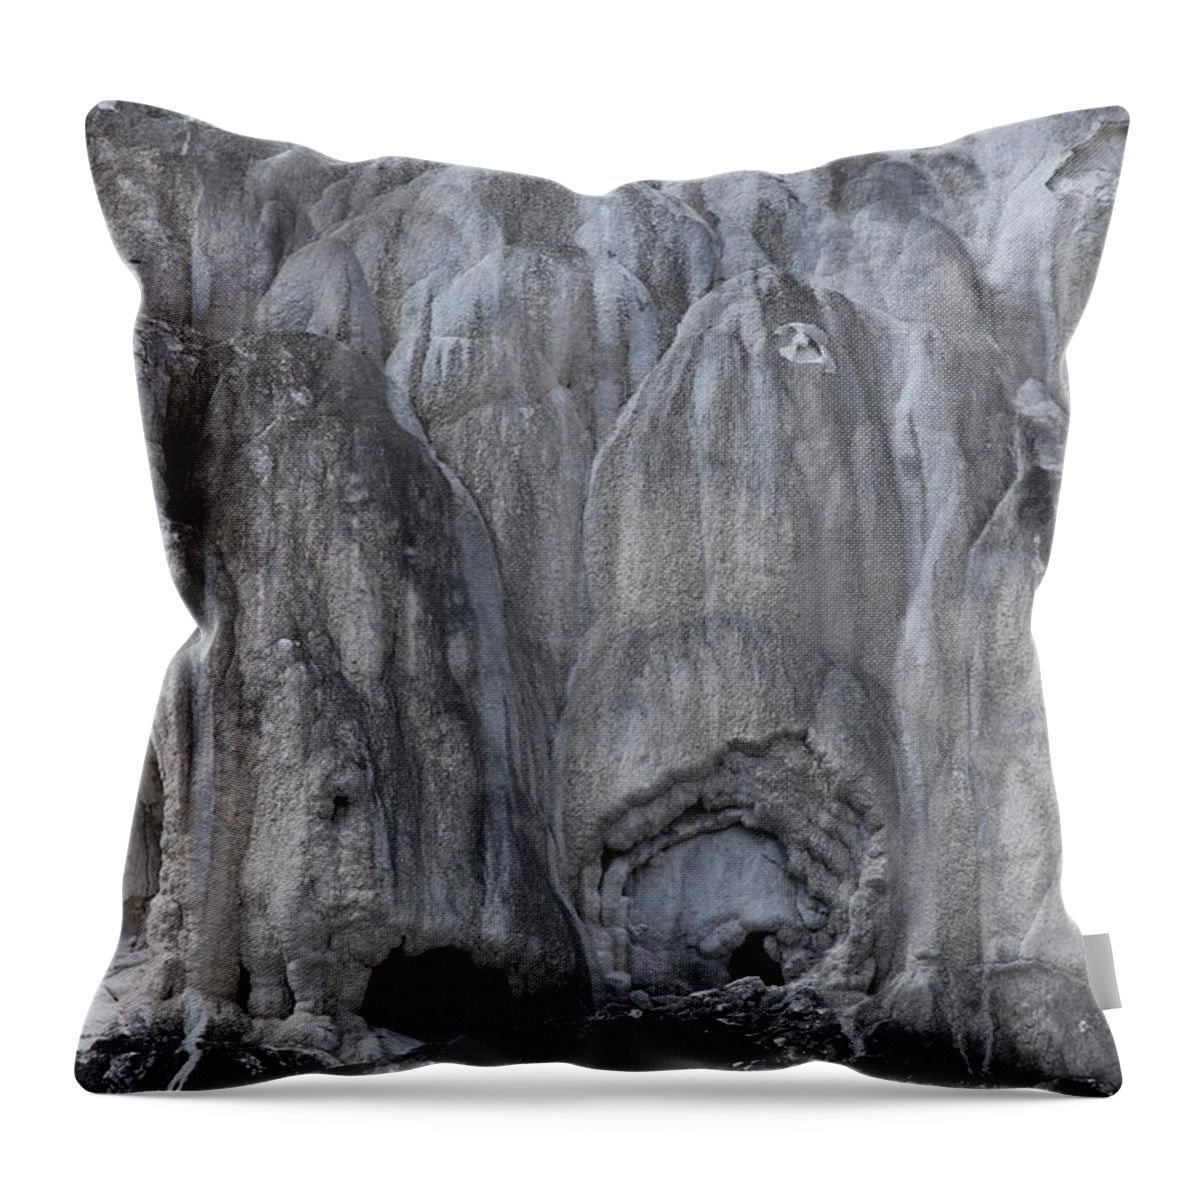 Texture Throw Pillow featuring the photograph Yellowstone 3683 by Michael Fryd